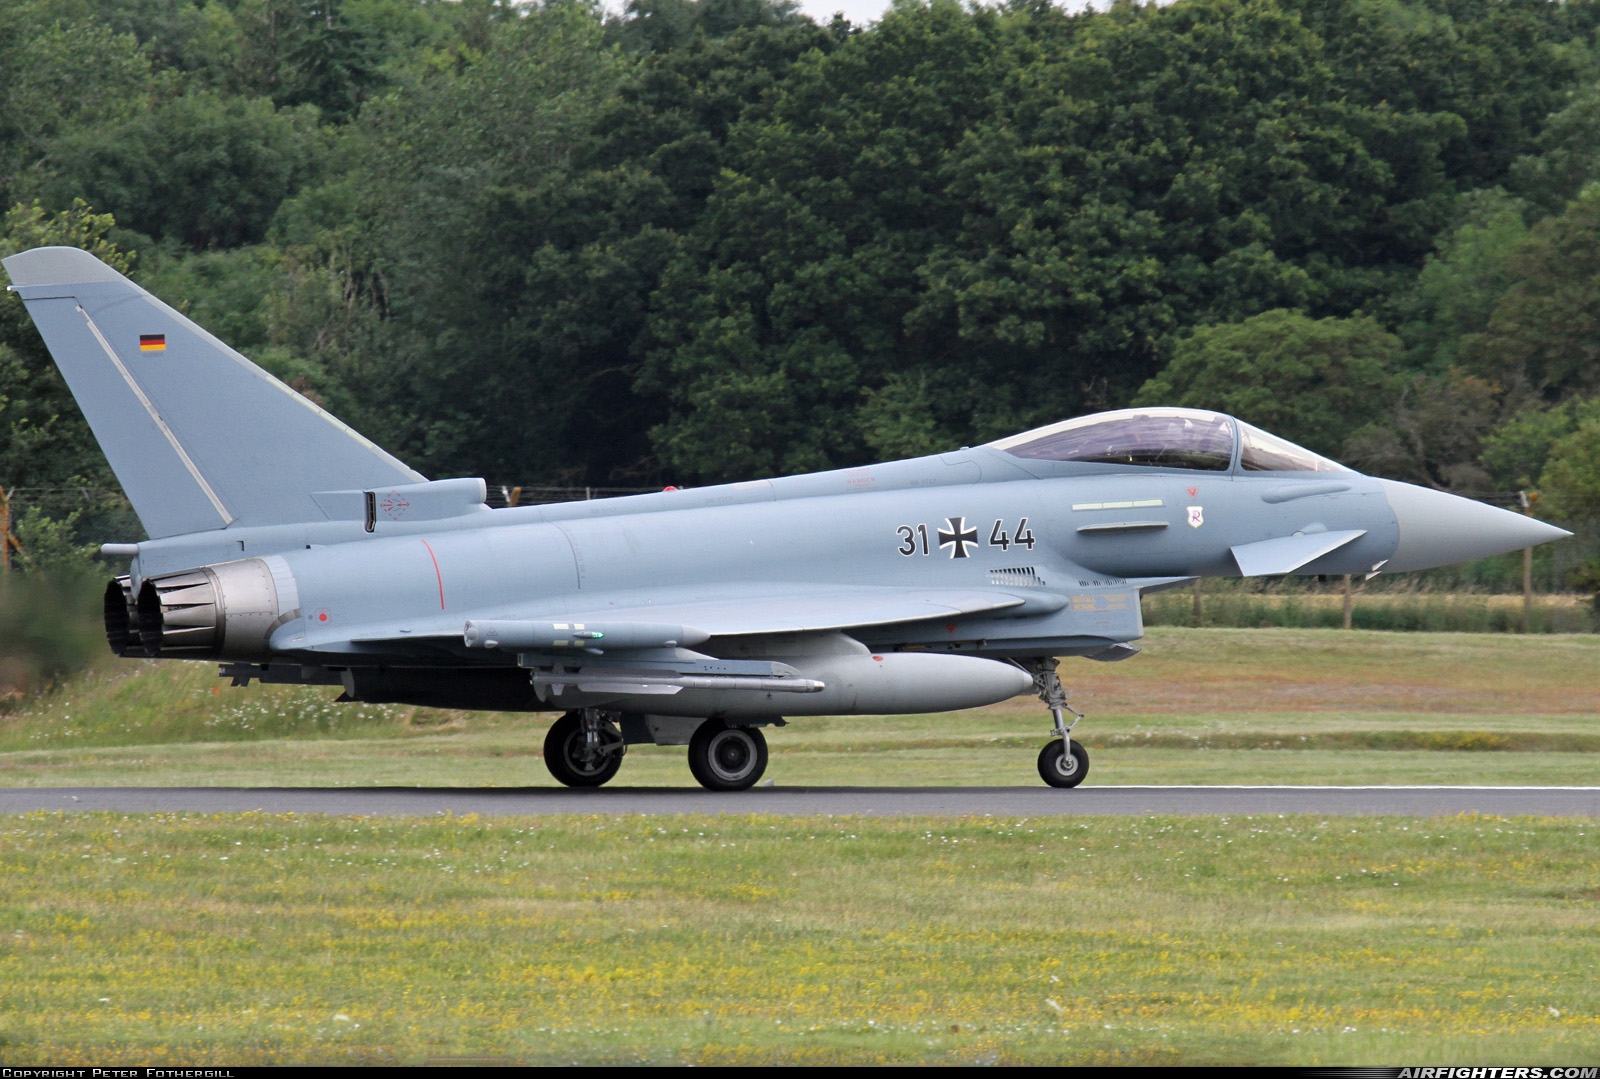 Germany - Air Force Eurofighter EF-2000 Typhoon S 31+44 at Fairford (FFD / EGVA), UK